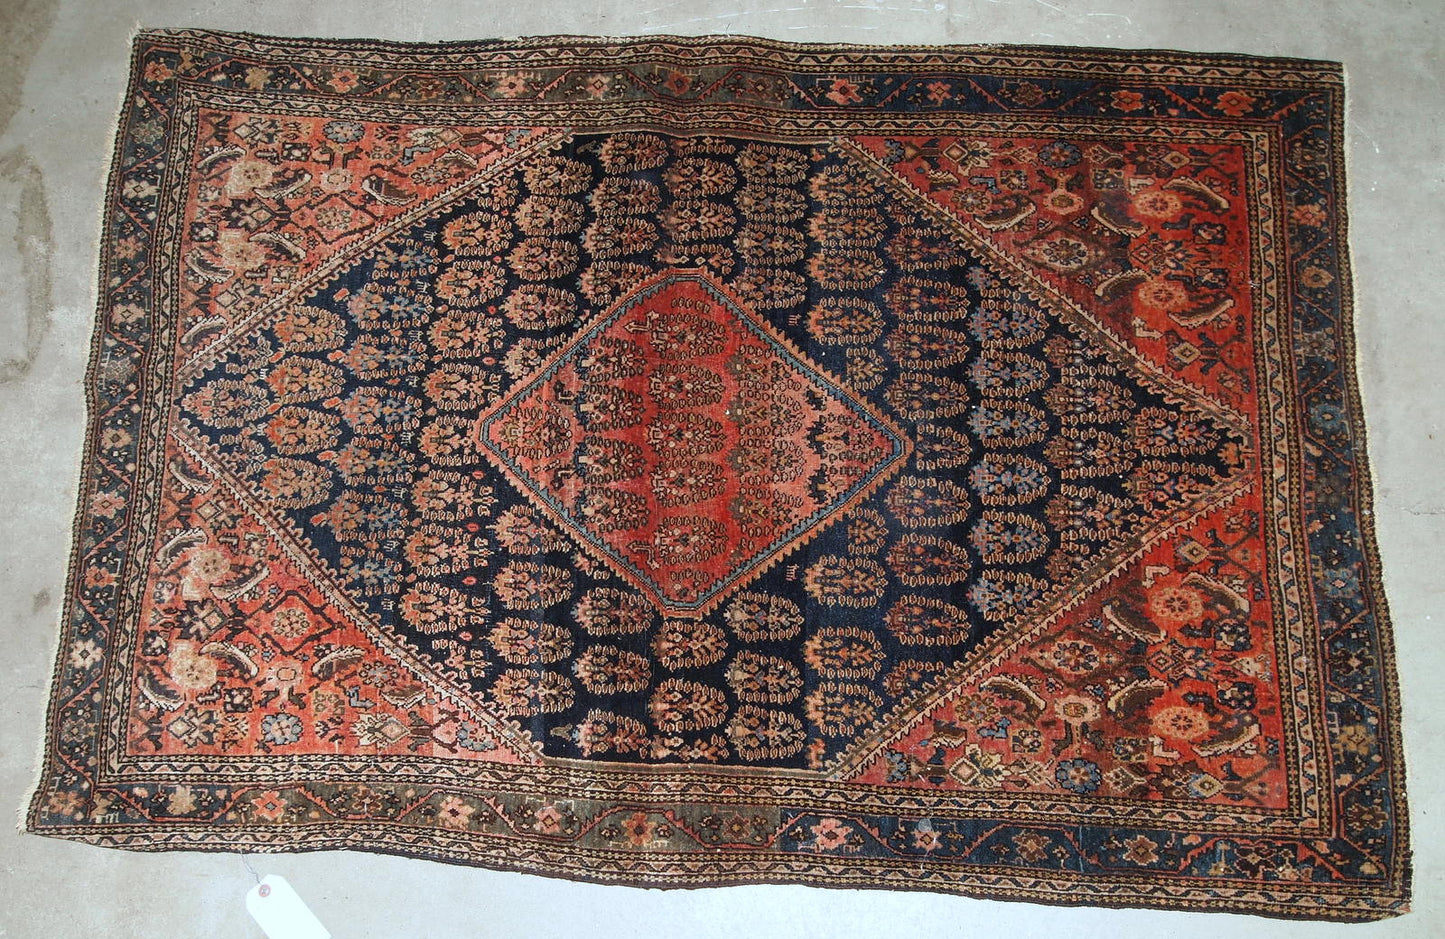 Handmade antique Persian Farahan rug in original good condition. The rug is from the beginning of 20th century made in floral and geometric designs.